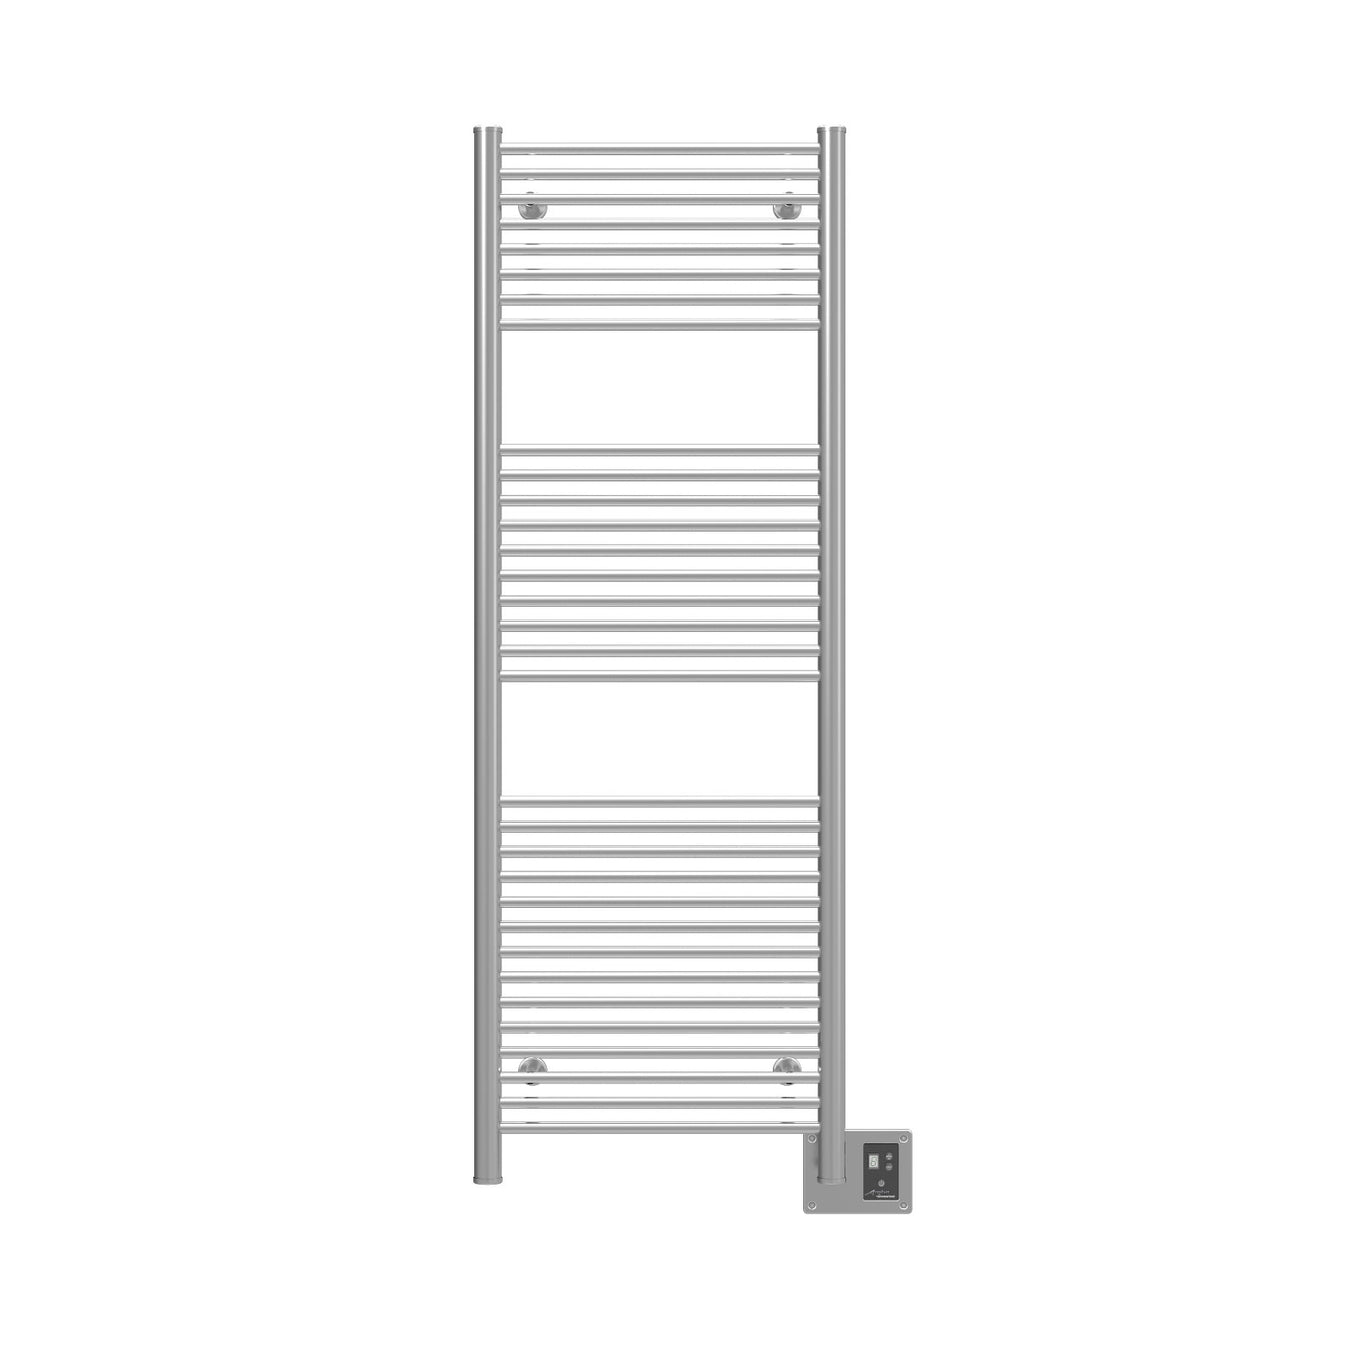 Amba Products Antus Collection A2056 Towel Warmers